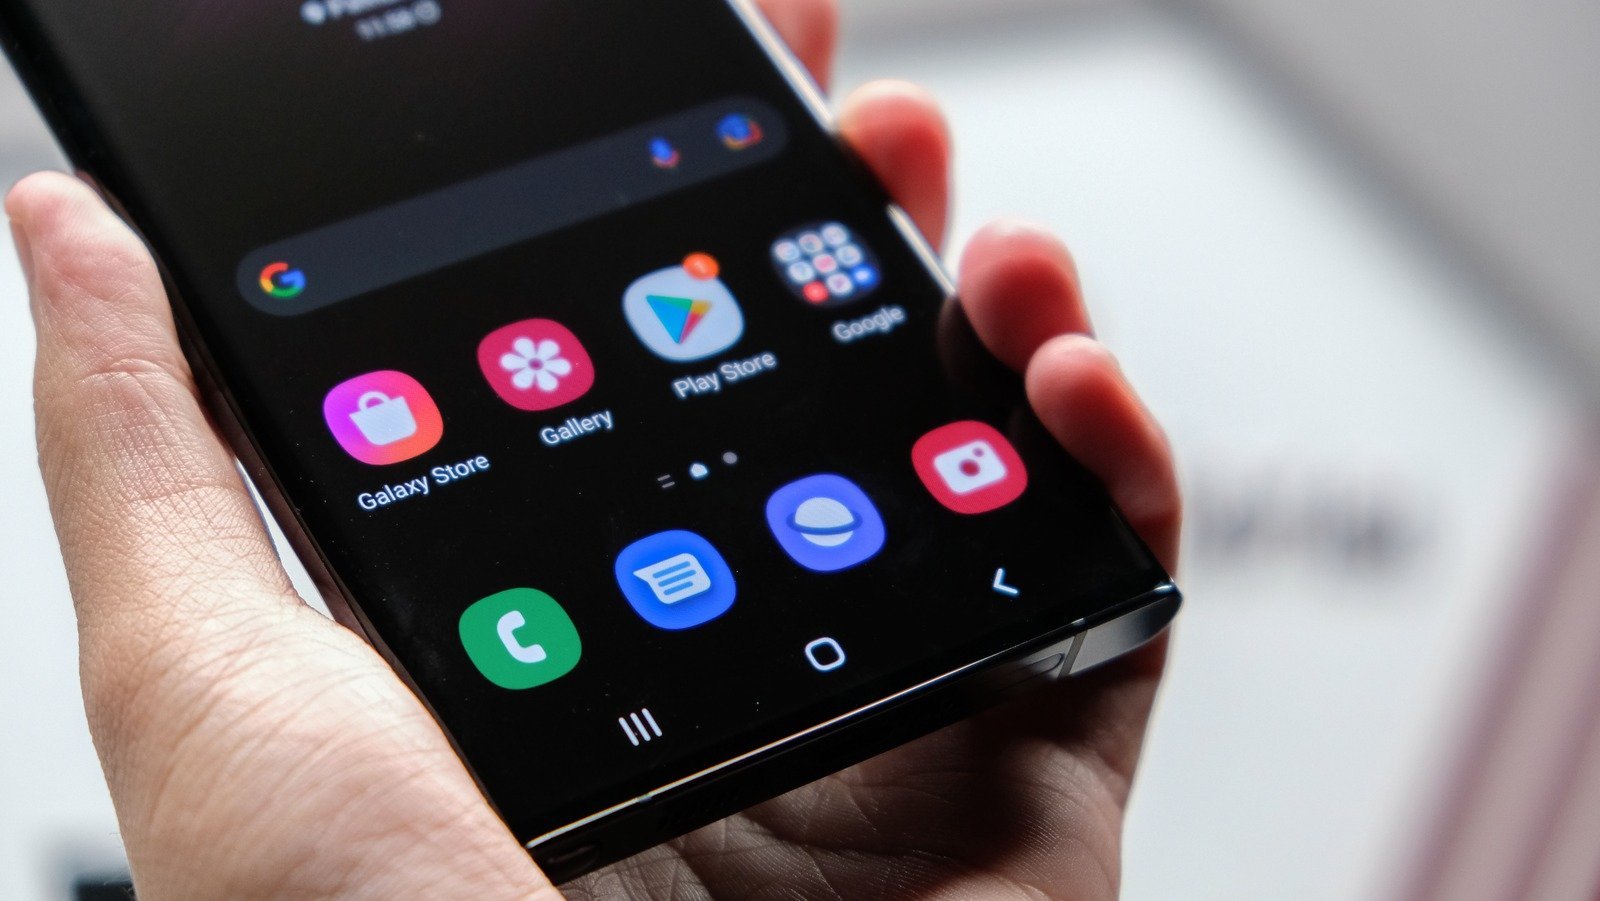 12 Things You Should Stop Doing On Your Android Phone Immediately